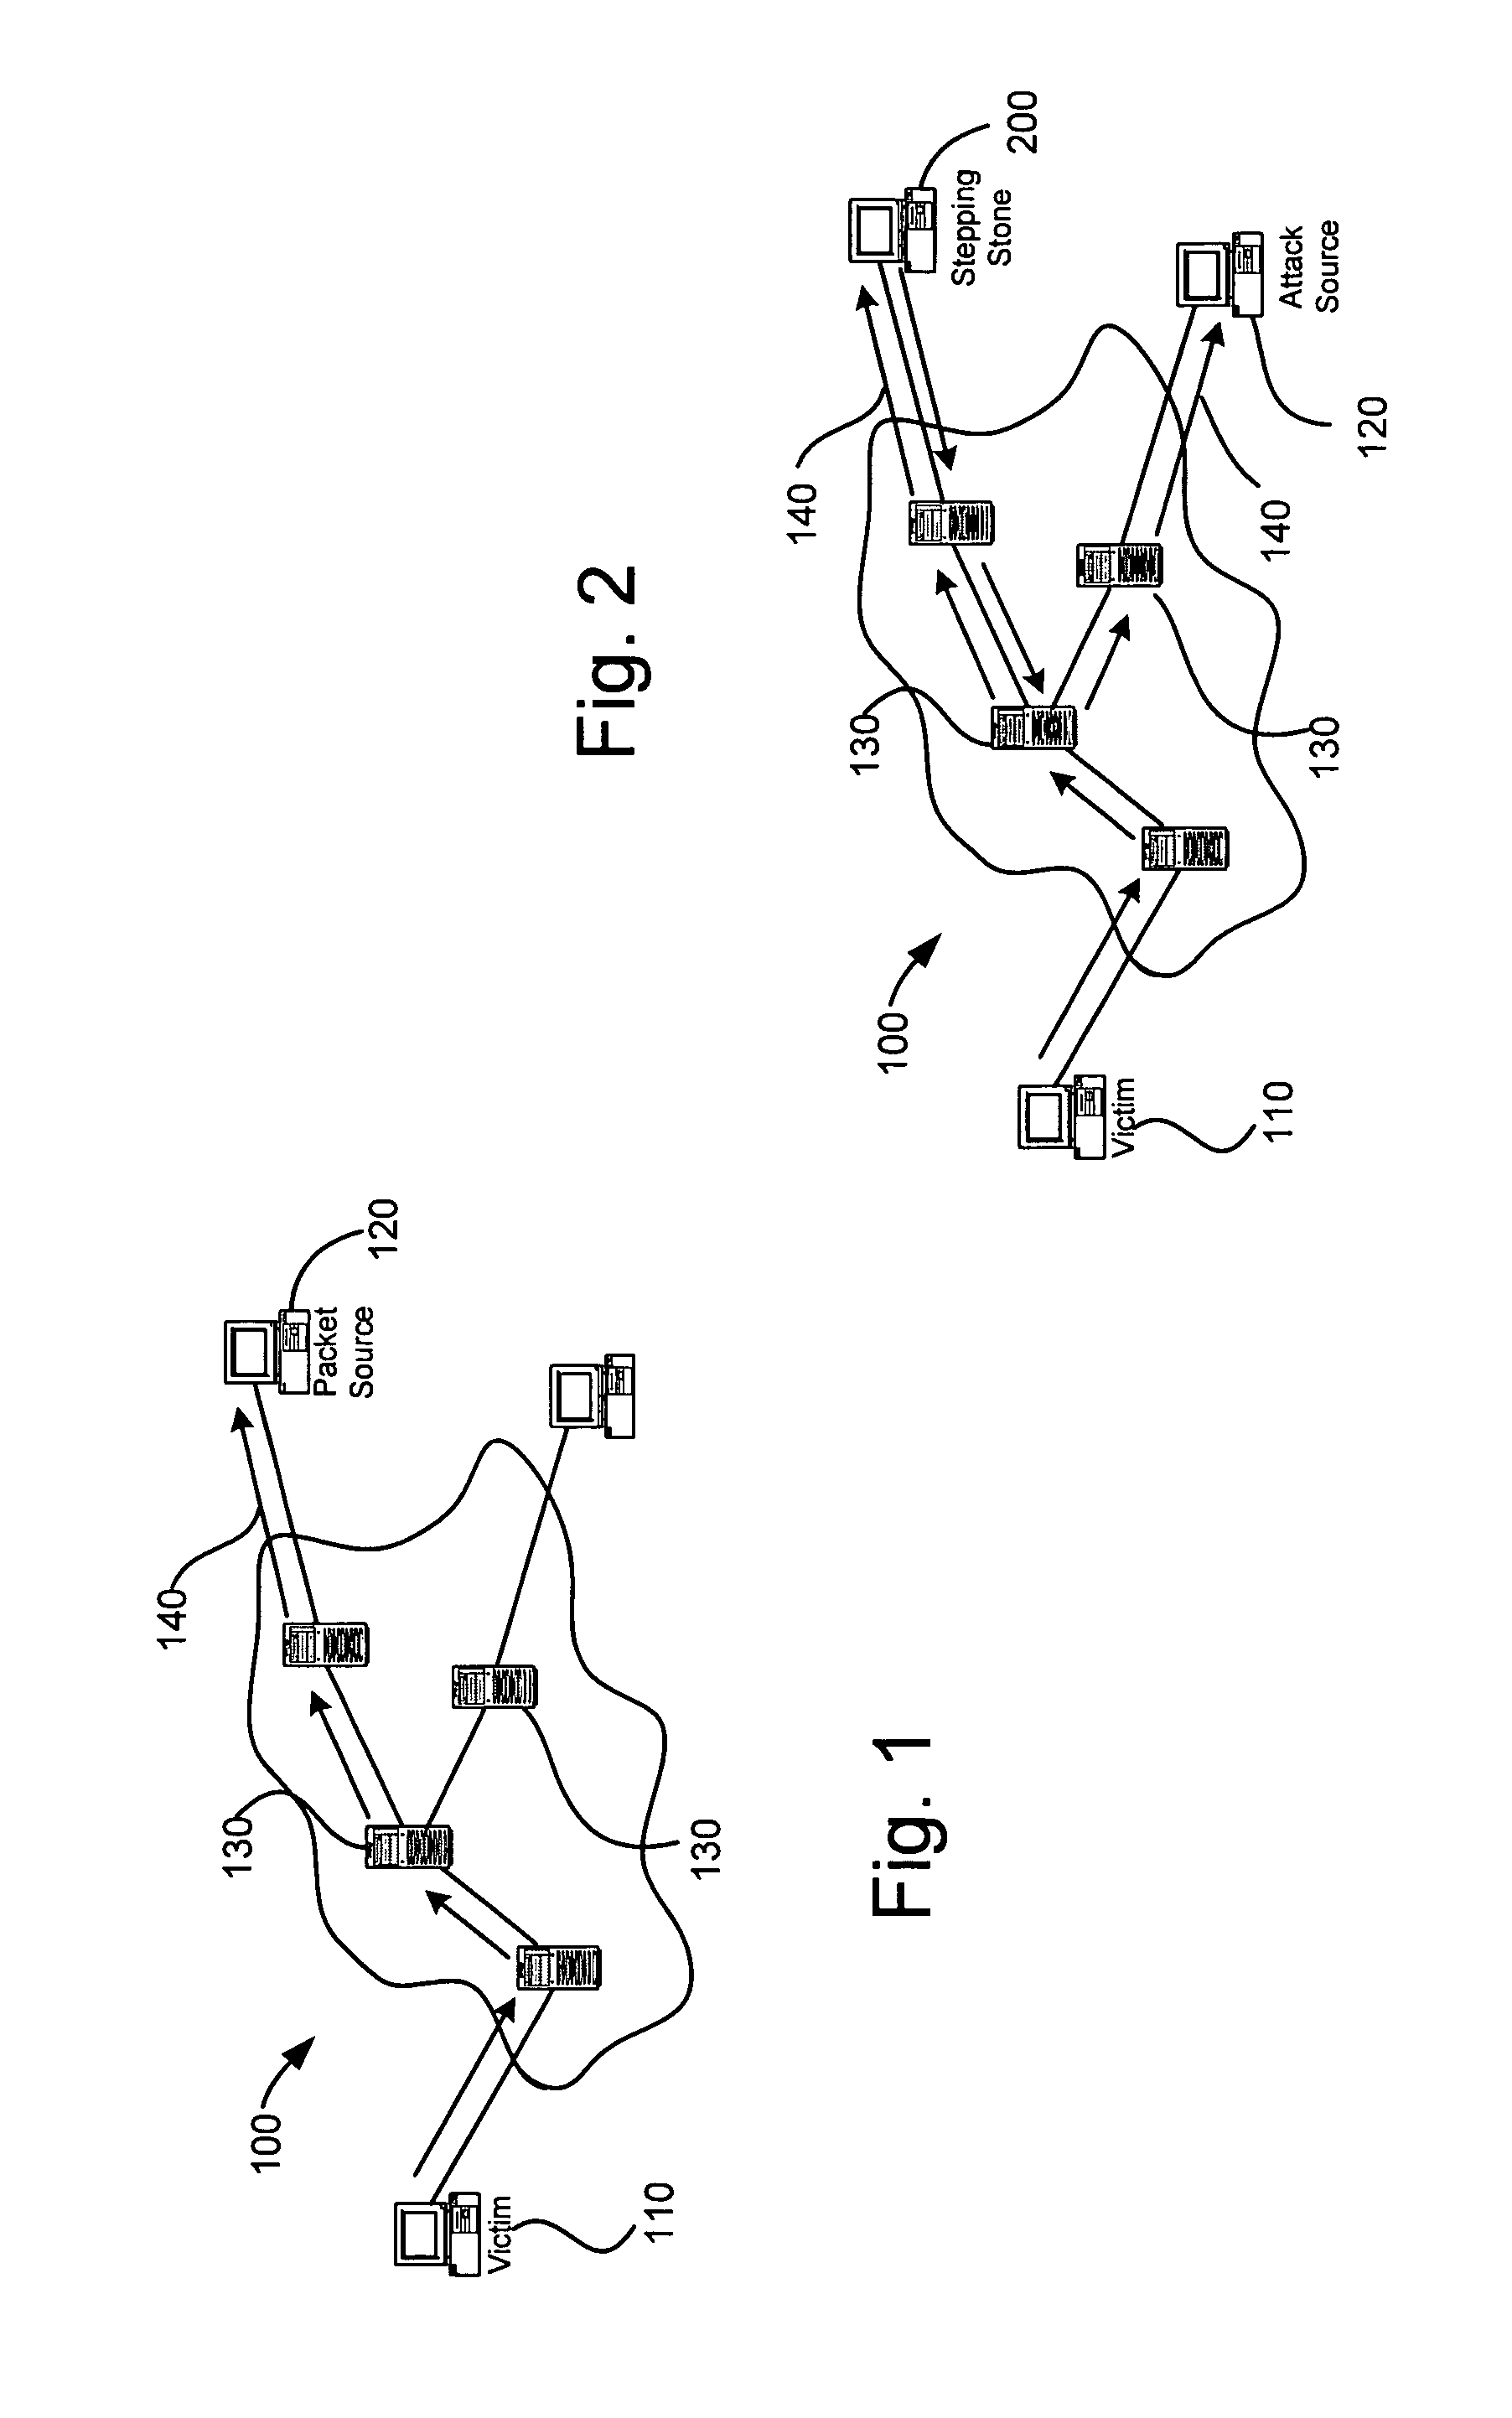 Method and system for aggregating algorithms for detecting linked interactive network connections